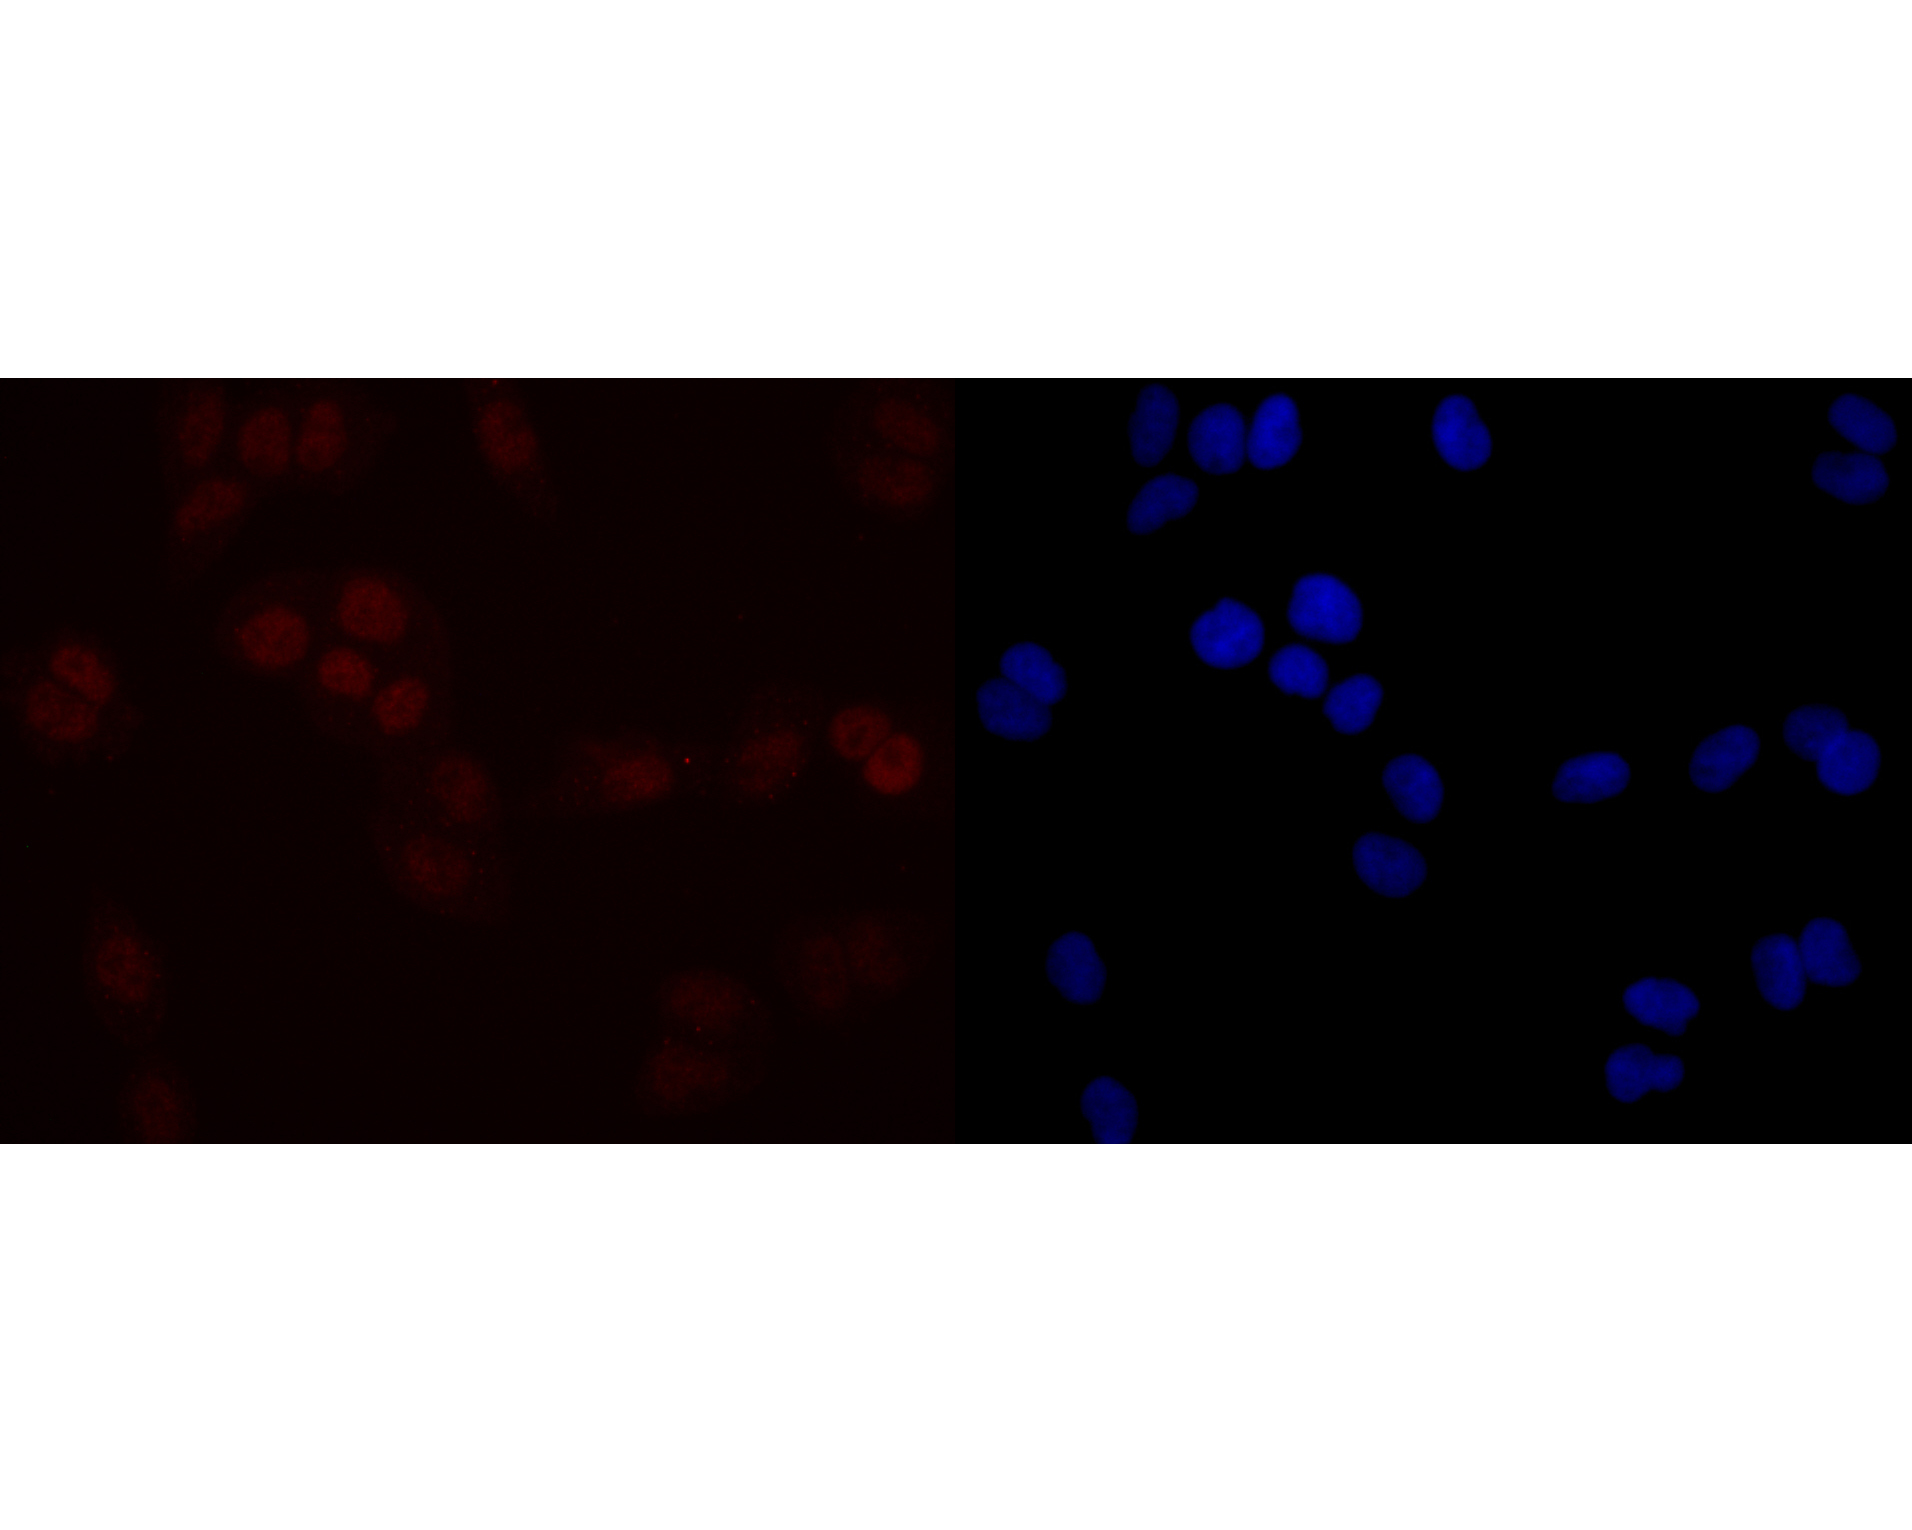 ICC staining of SIRT1 in Hela cells (red). Formalin fixed cells were permeabilized with 0.1% Triton X-100 in TBS for 10 minutes at room temperature and blocked with 1% Blocker BSA for 15 minutes at room temperature. Cells were probed with the primary antibody (ET7110-49, 1/50) for 1 hour at room temperature, washed with PBS. Alexa Fluor®594 Goat anti-Rabbit IgG was used as the secondary antibody at 1/1,000 dilution. The nuclear counter stain is DAPI (blue).